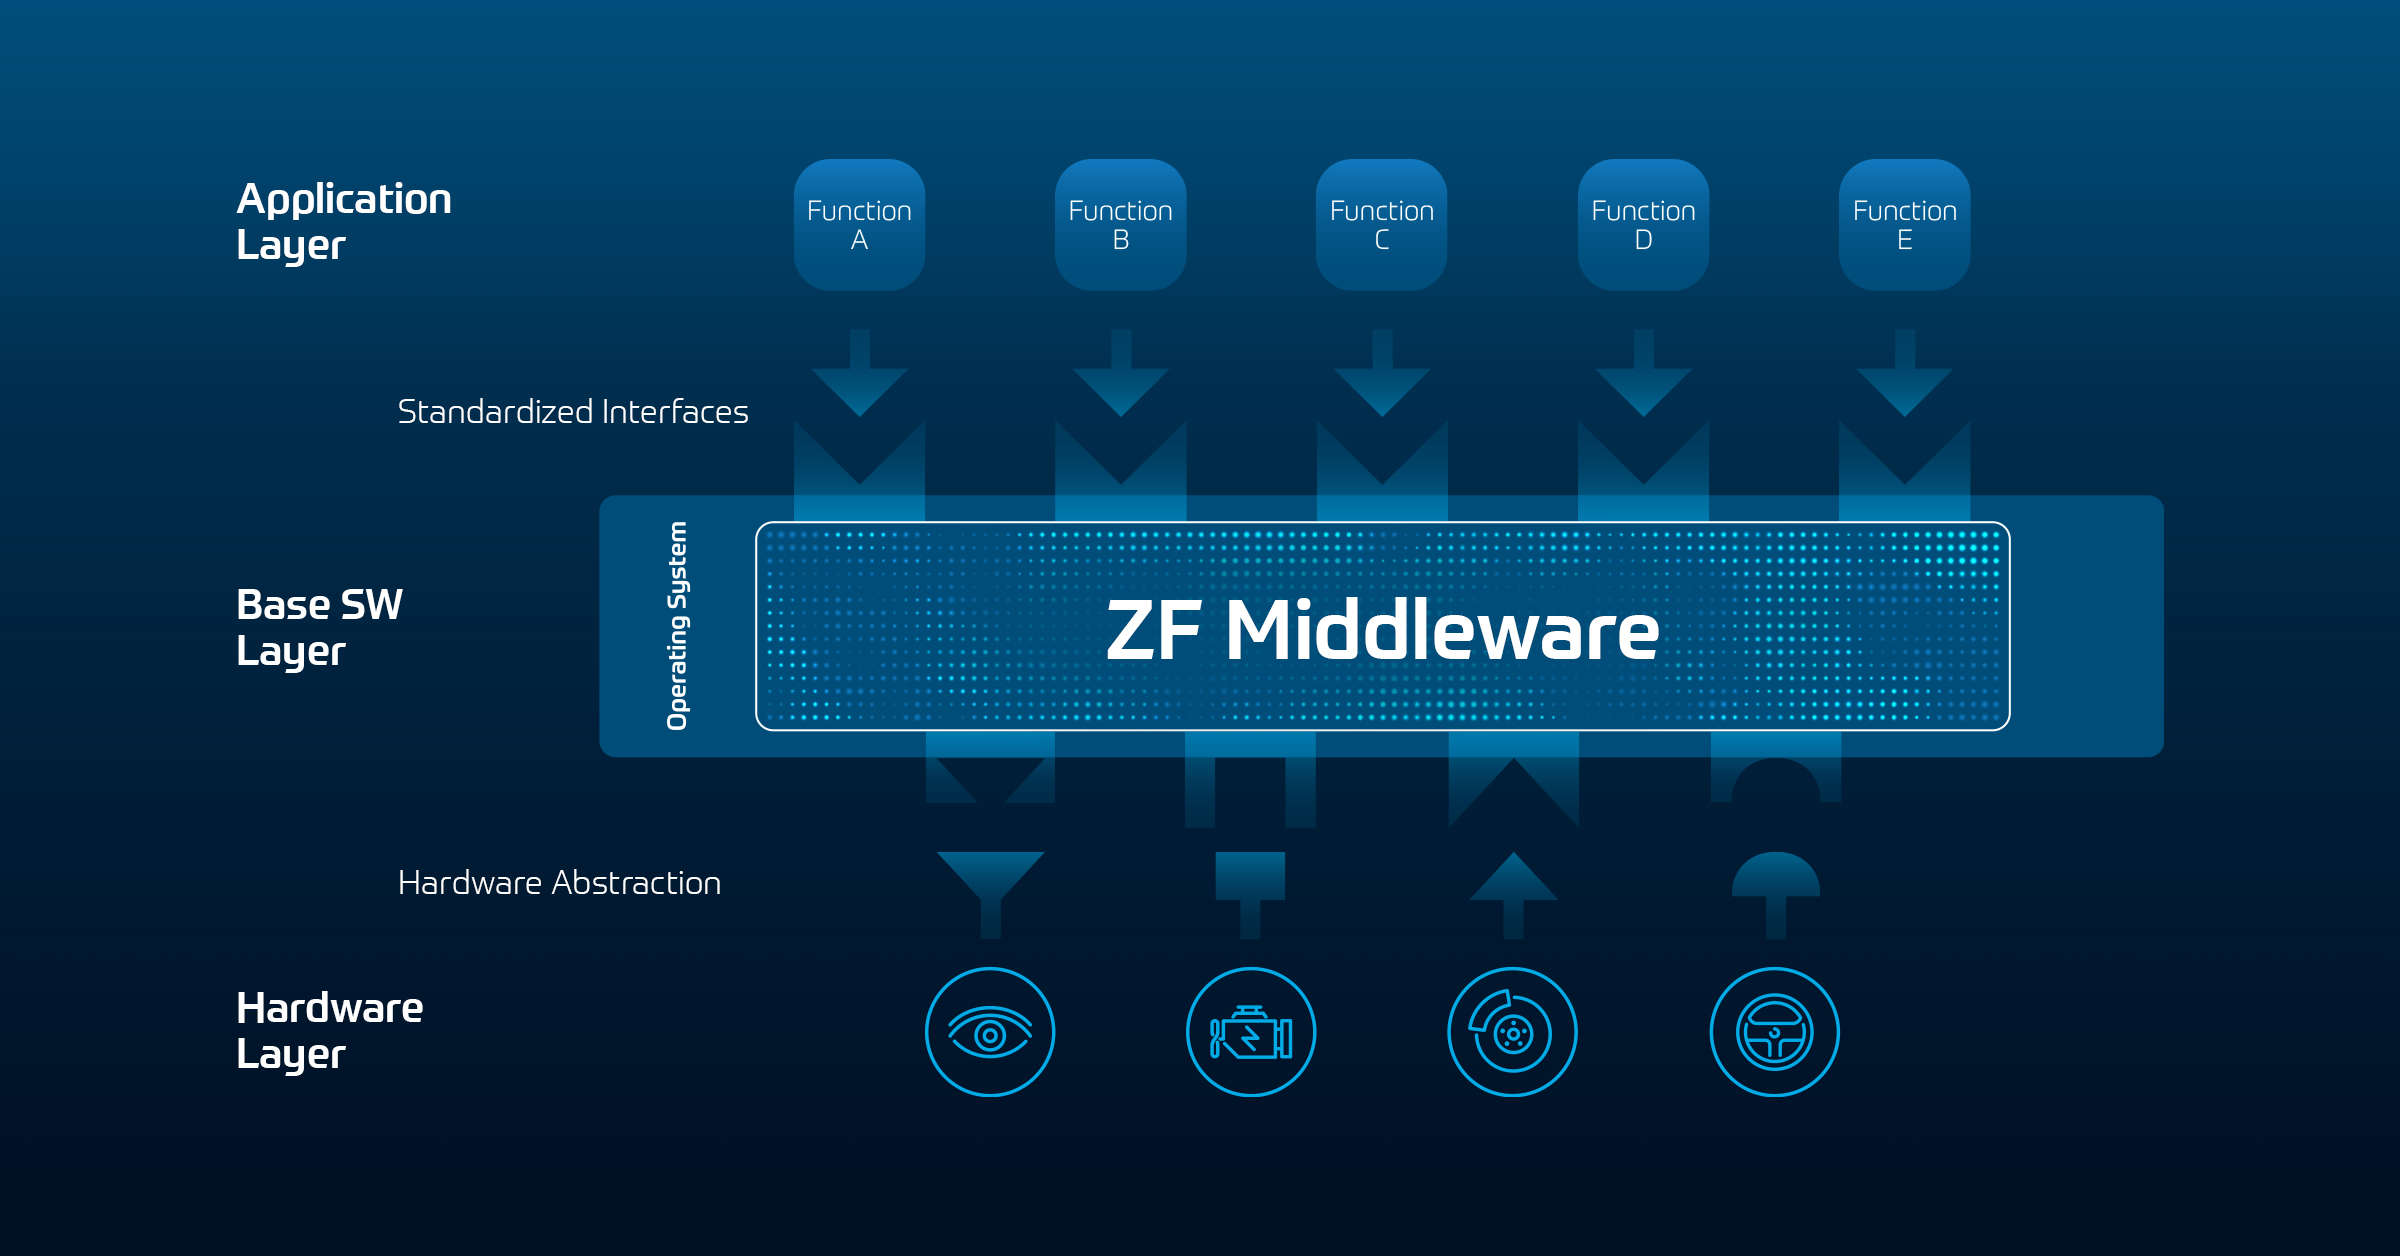 Depending on the OEM’s software architecture, ZF offers a modular approach with its Middleware from a full platform solution to single modules that can be integrated into the OEM’s software platform.